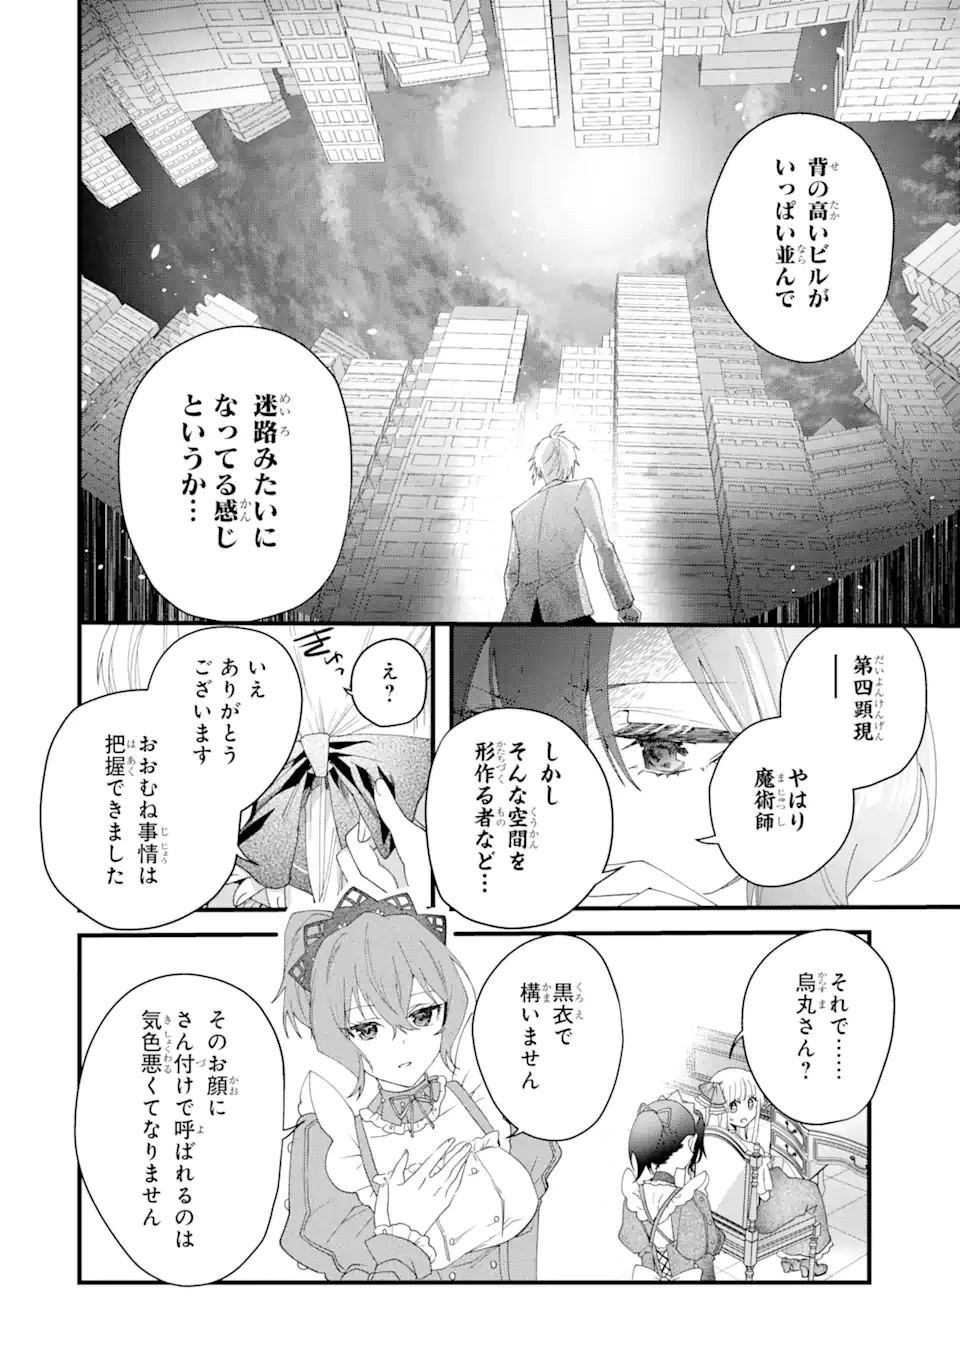 Ousama no Propose - Chapter 1.2 - Page 17